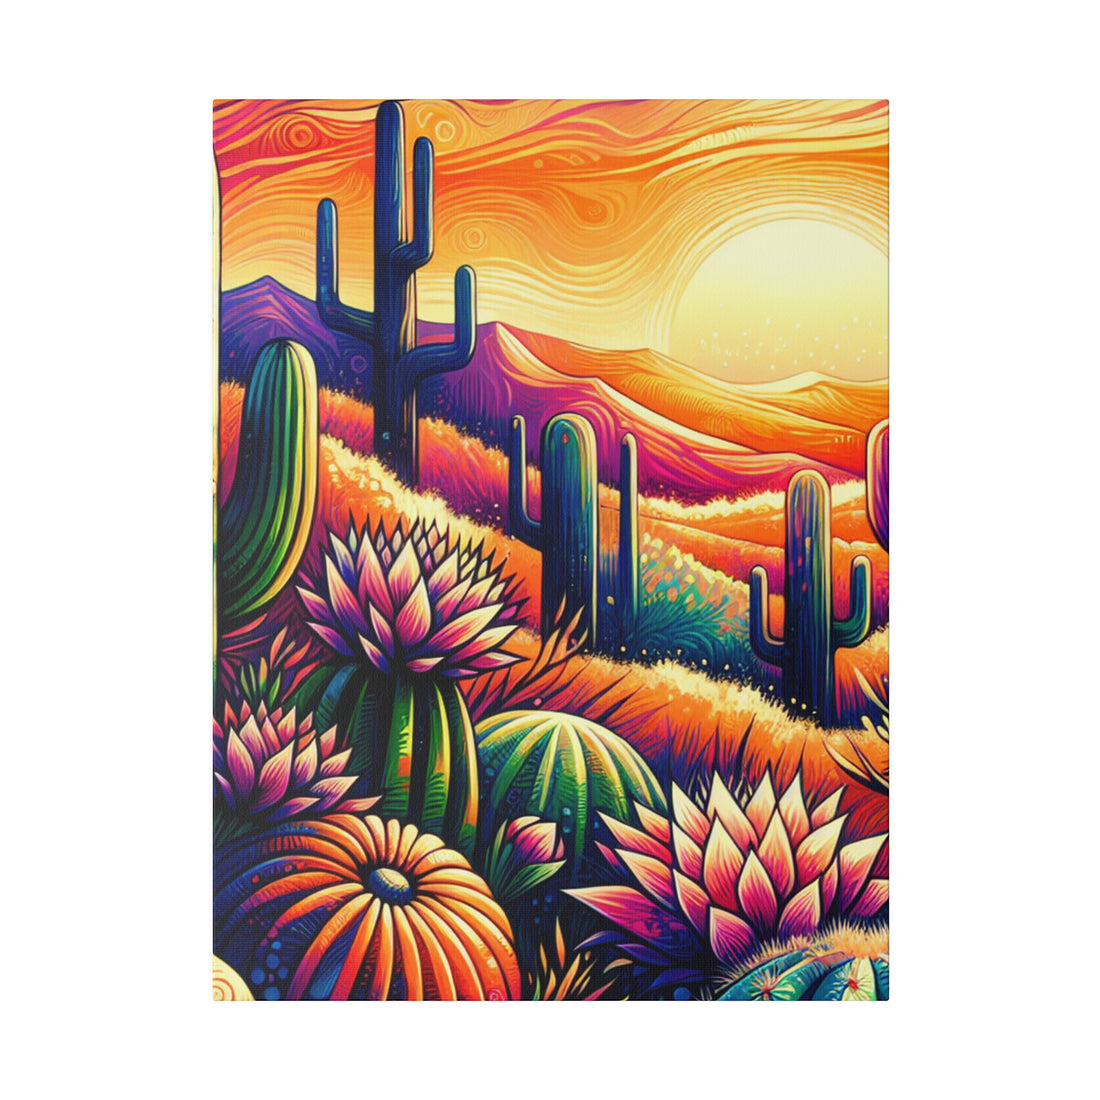 "Cactus Mirage: Canvas Wall Art Collection"